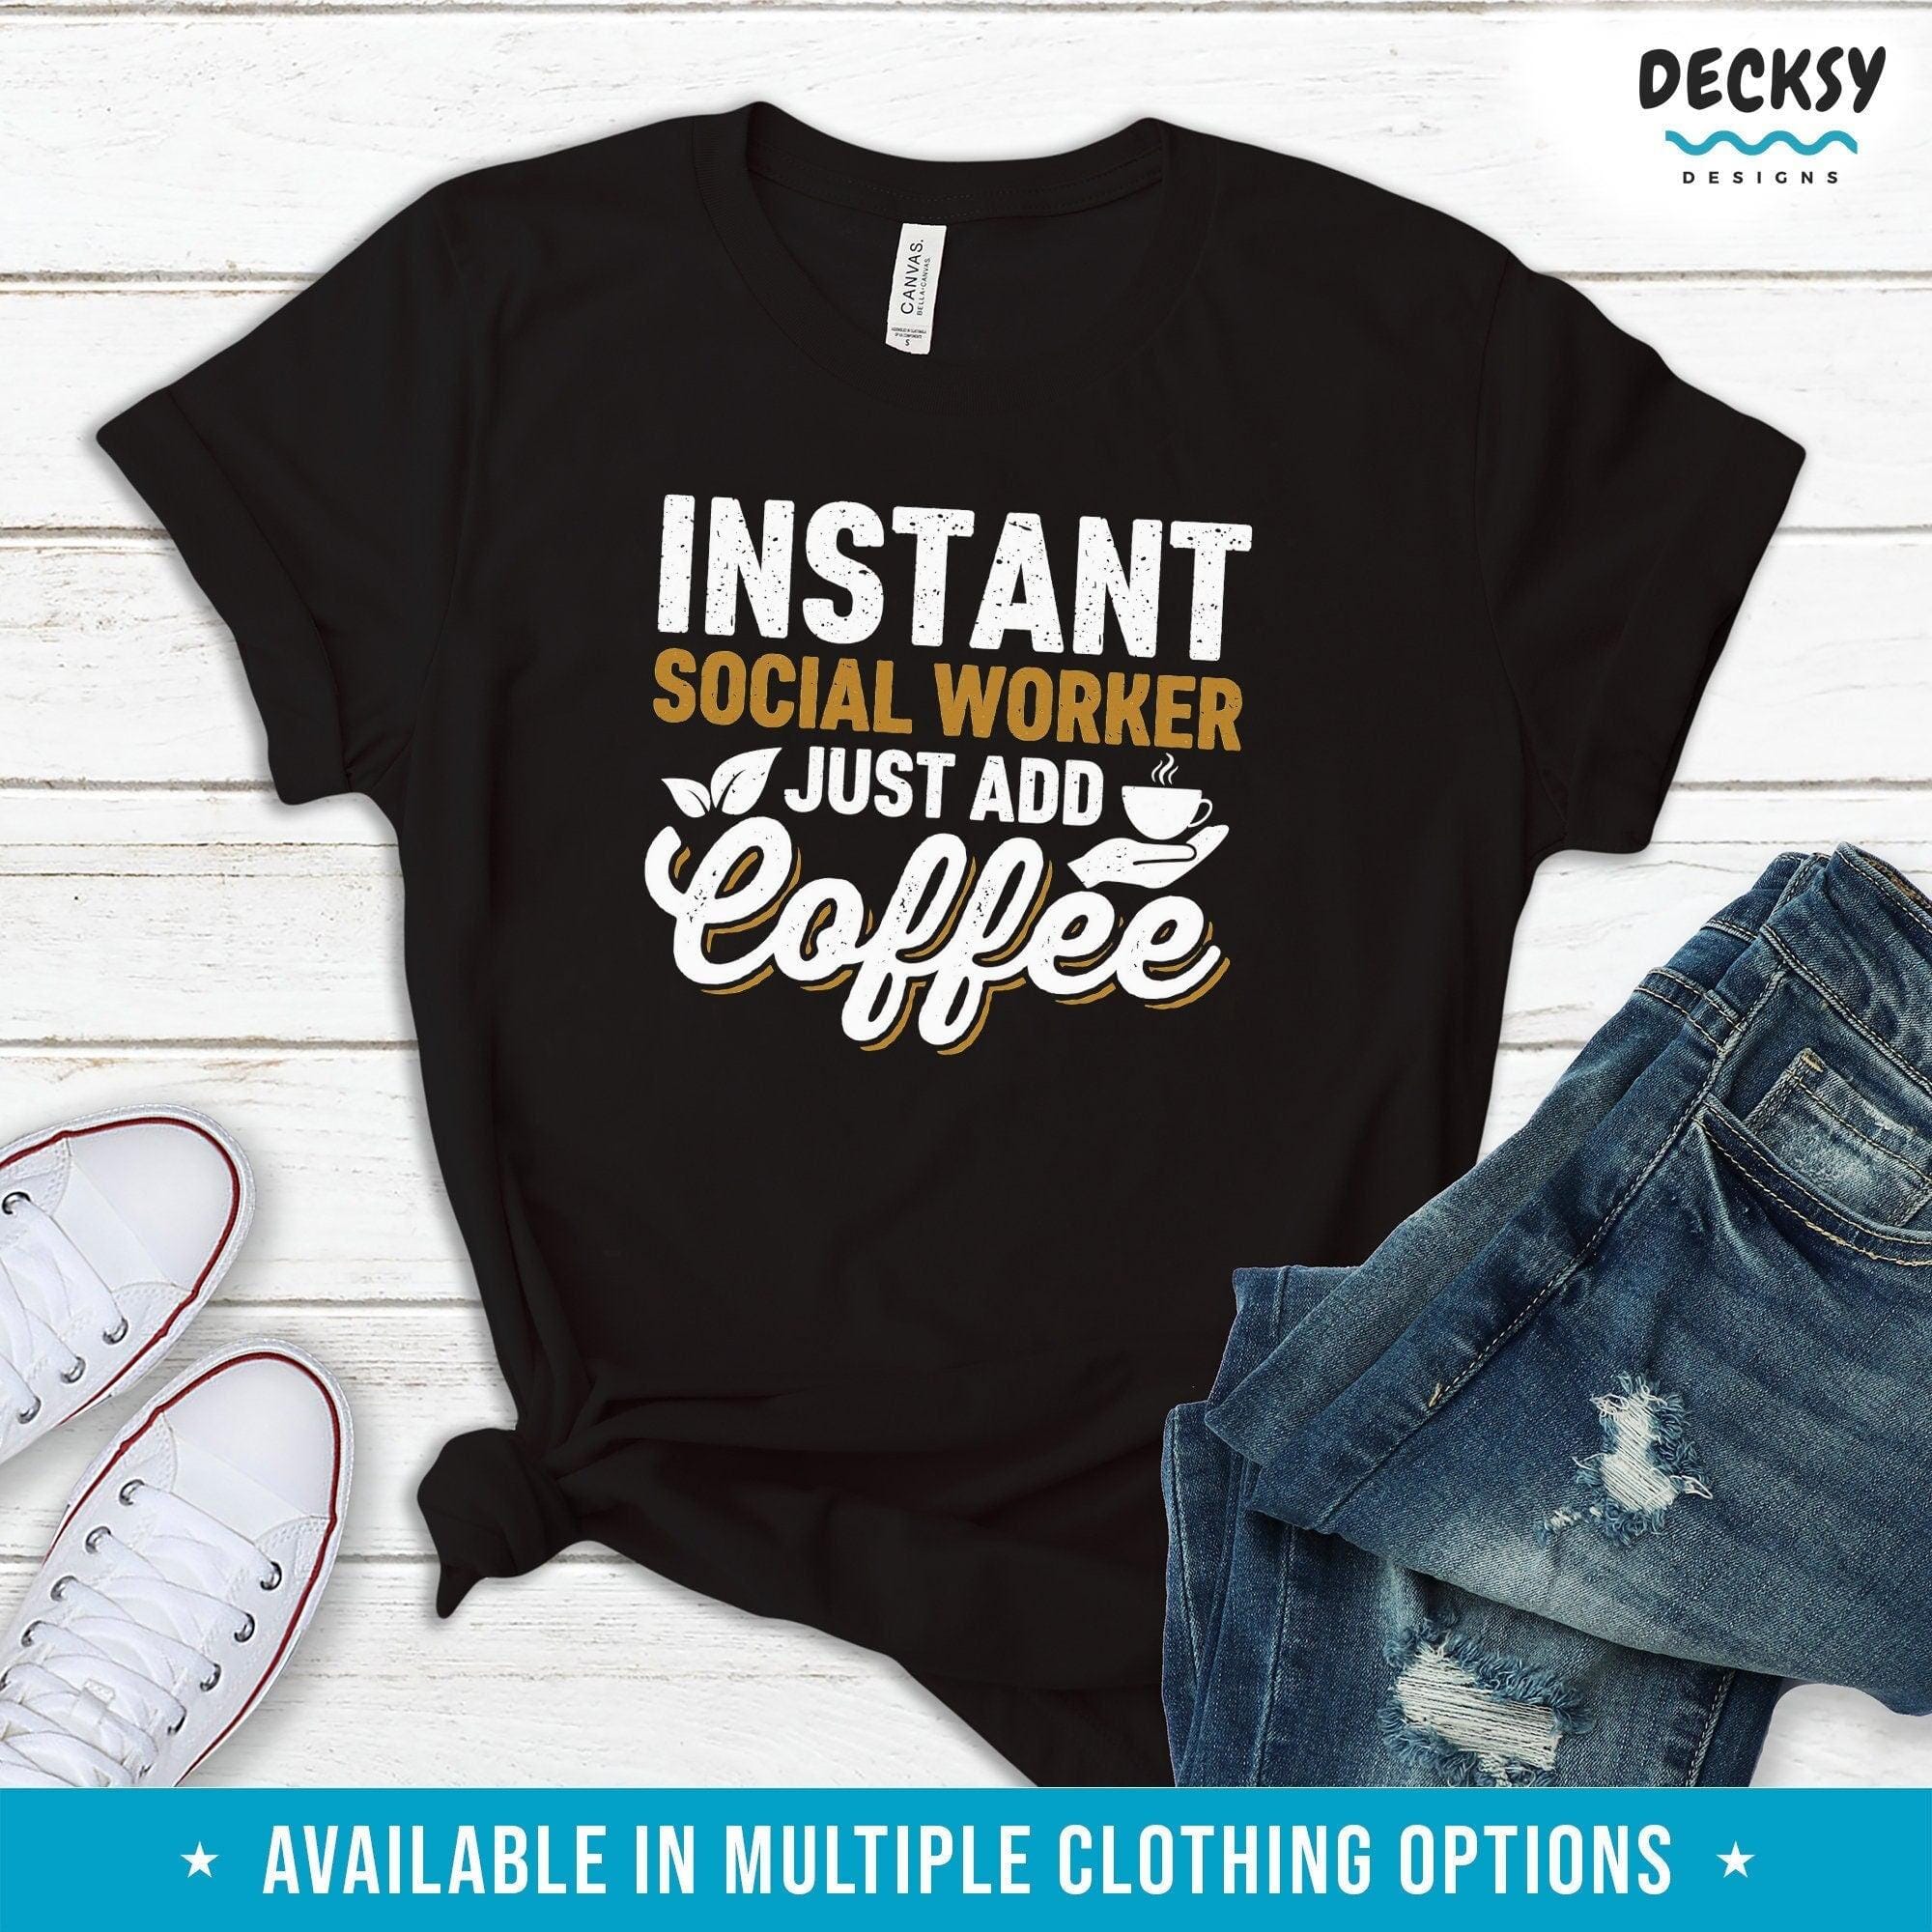 Social Worker Shirt, Coffee Lover Gift-Clothing:Gender-Neutral Adult Clothing:Tops & Tees:T-shirts:Graphic Tees-DecksyDesigns